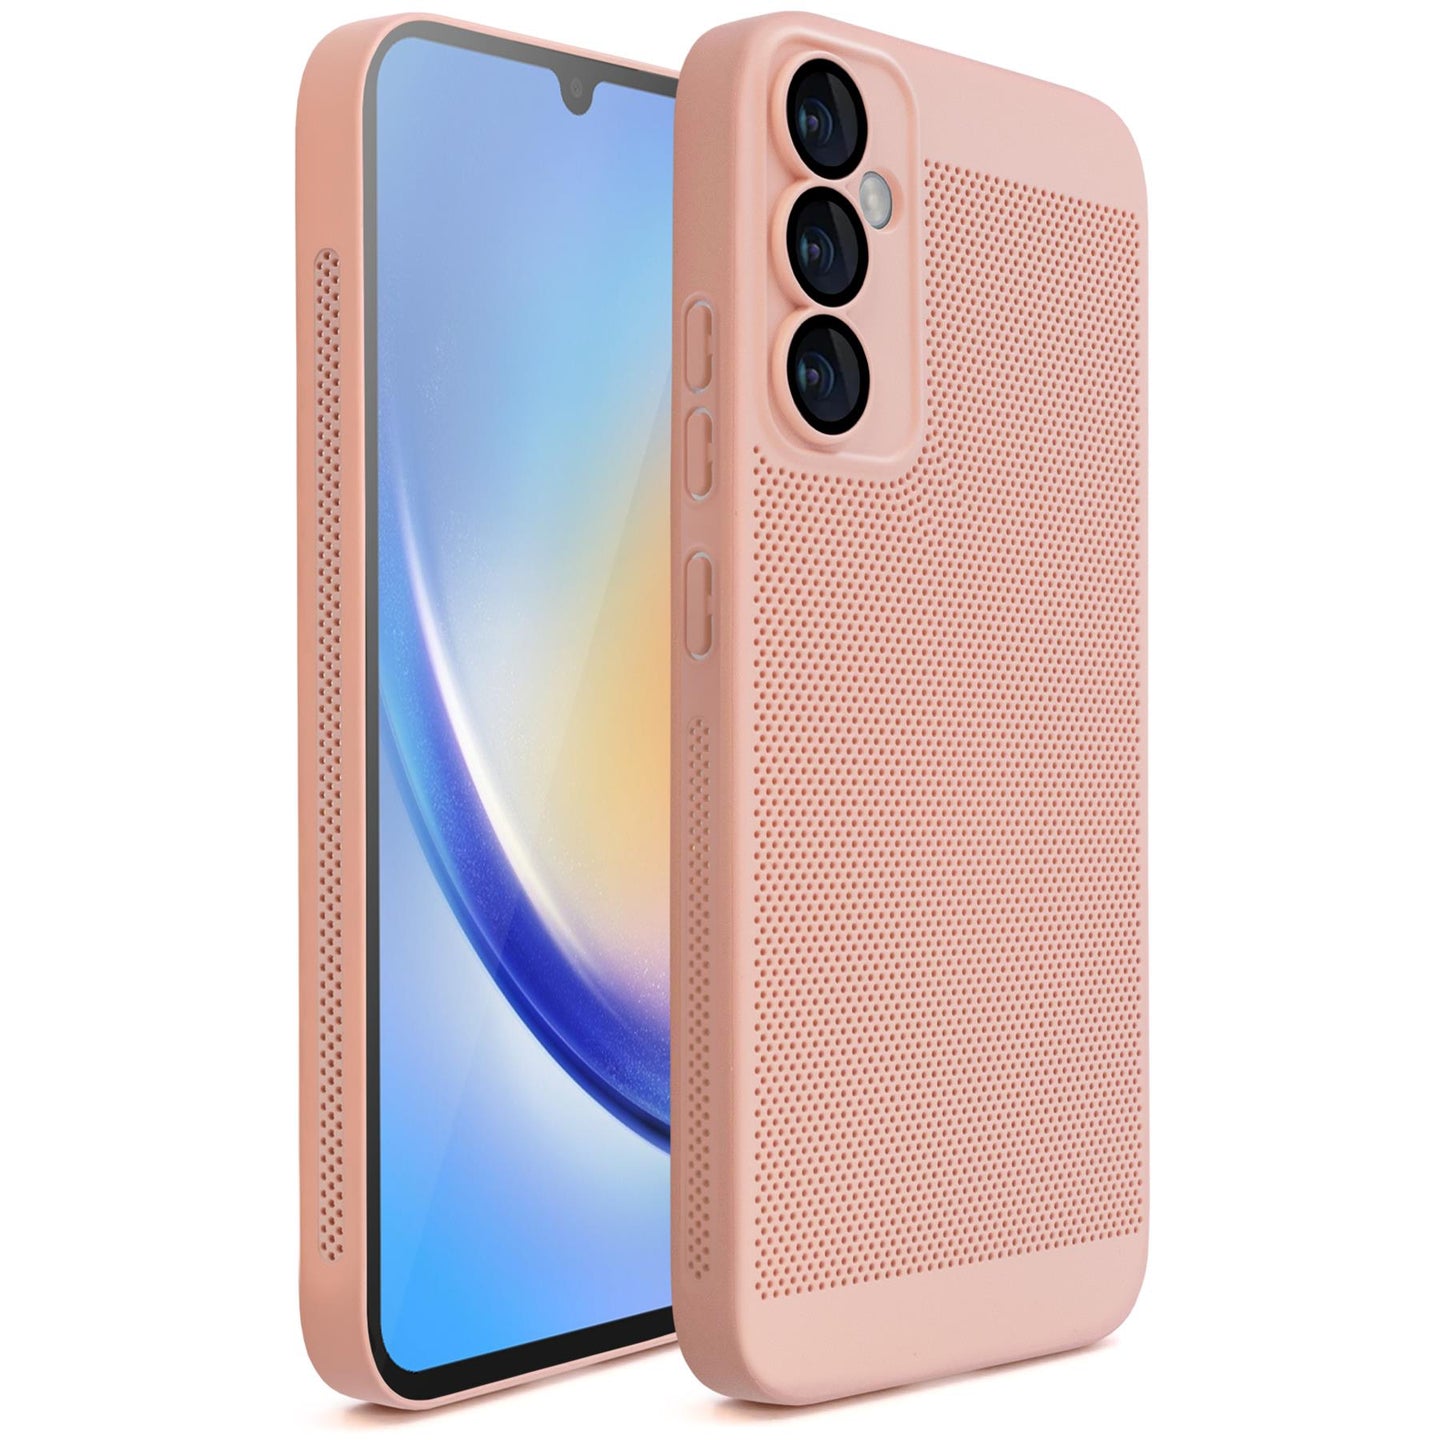 Moozy VentiGuard Phone Case for Samsung A34 5G, Pastel Pink - Breathable Cover with Perforated Pattern for Air Circulation, Ventilation, Anti-Overheating Phone Case